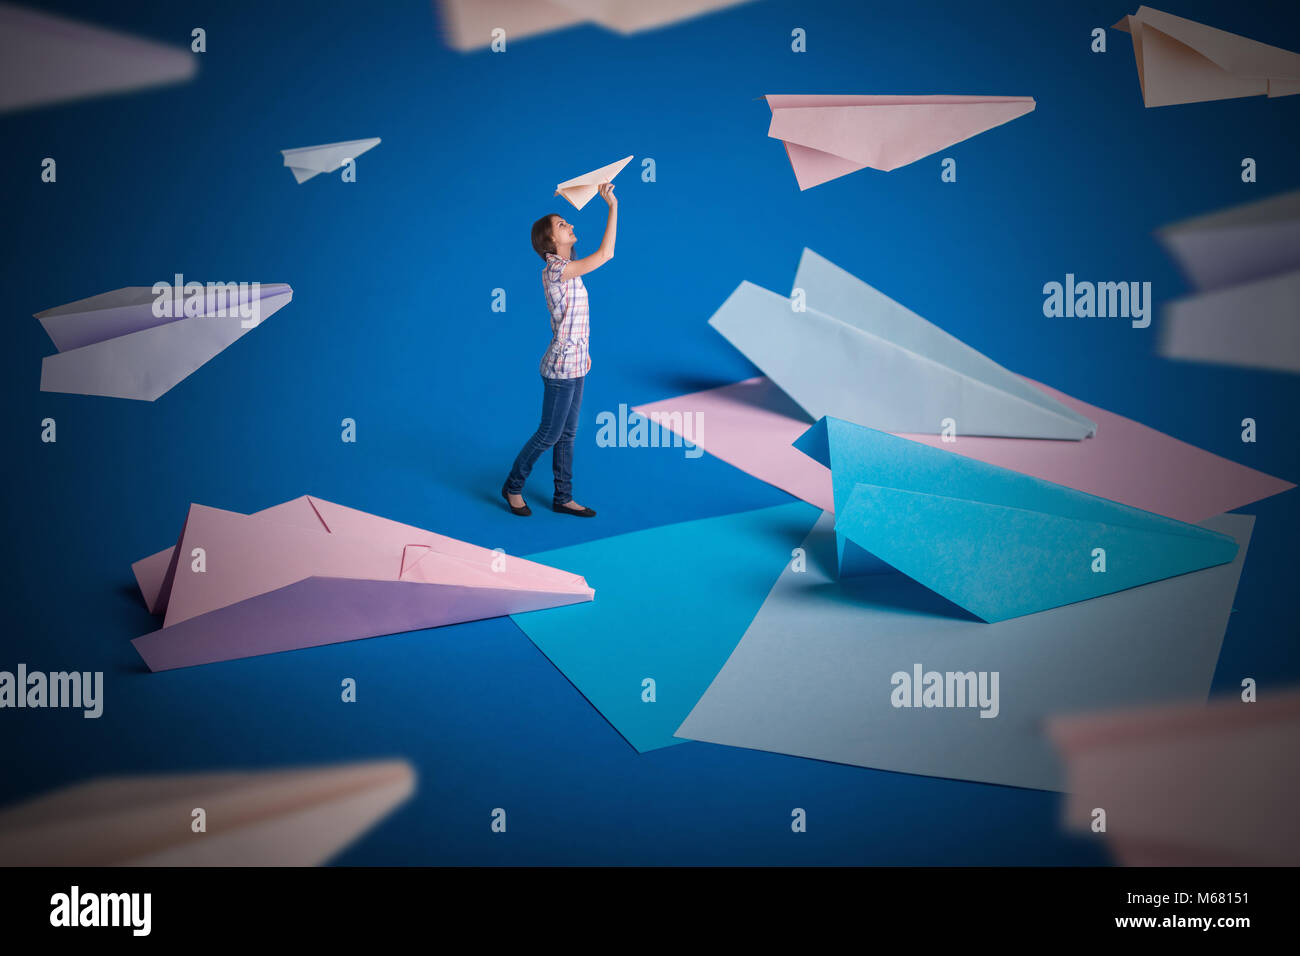 Creative surrealism design with origami paper planes. Girl let paper airplanes Stock Photo